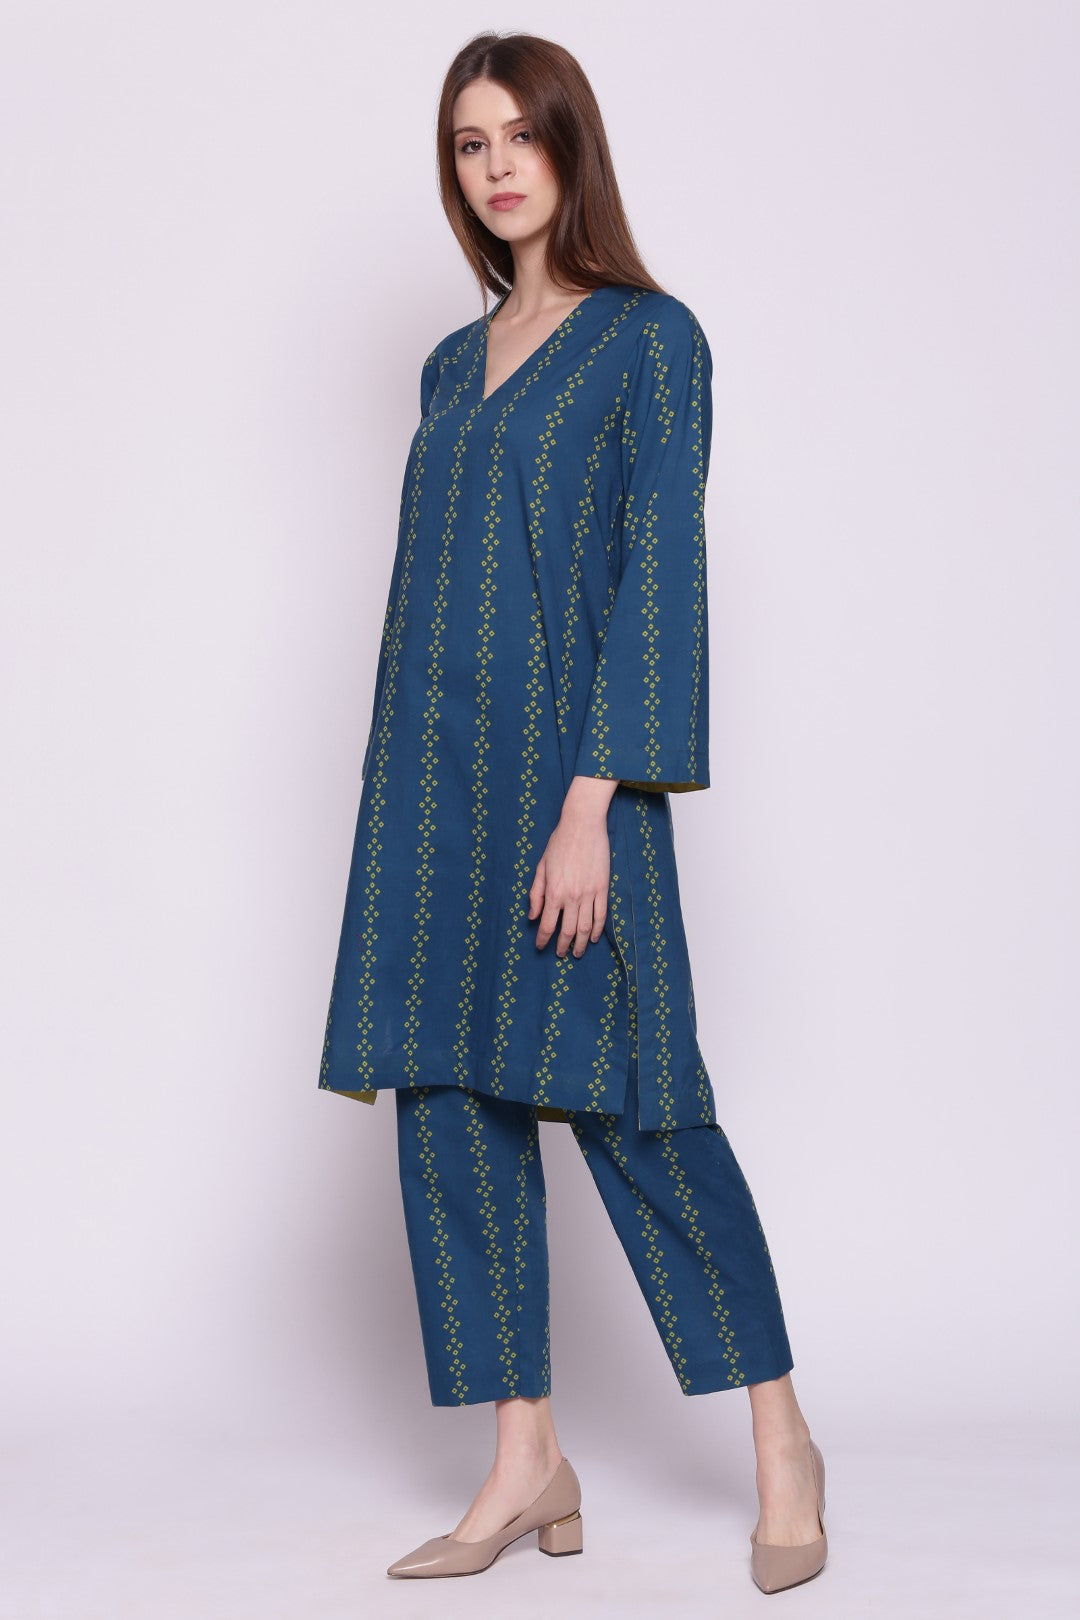 BLUE AND OLIVE COTTON VERTICLE STRIPE BANDHANI PRINT KUTRA